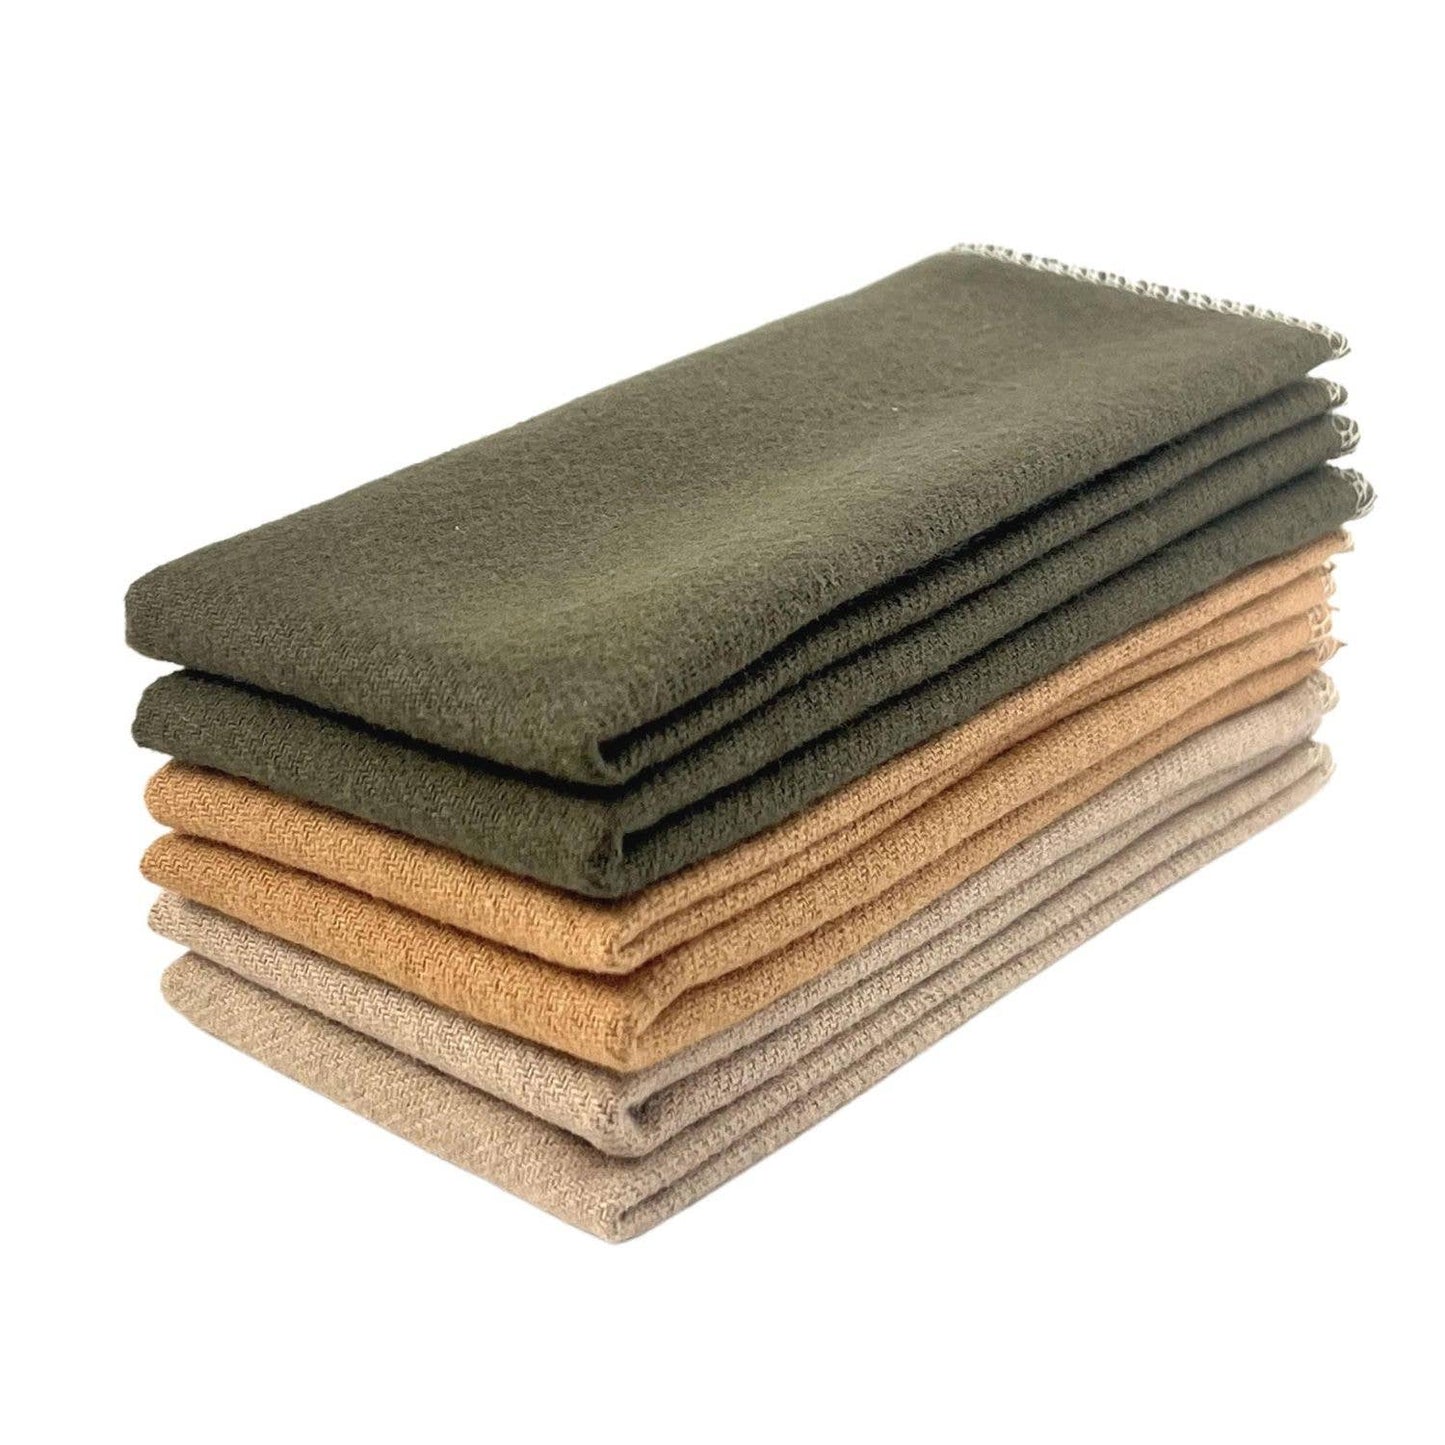 Organic Brushed Cotton Non•Paper Towels: 12-pk / Earth Tones